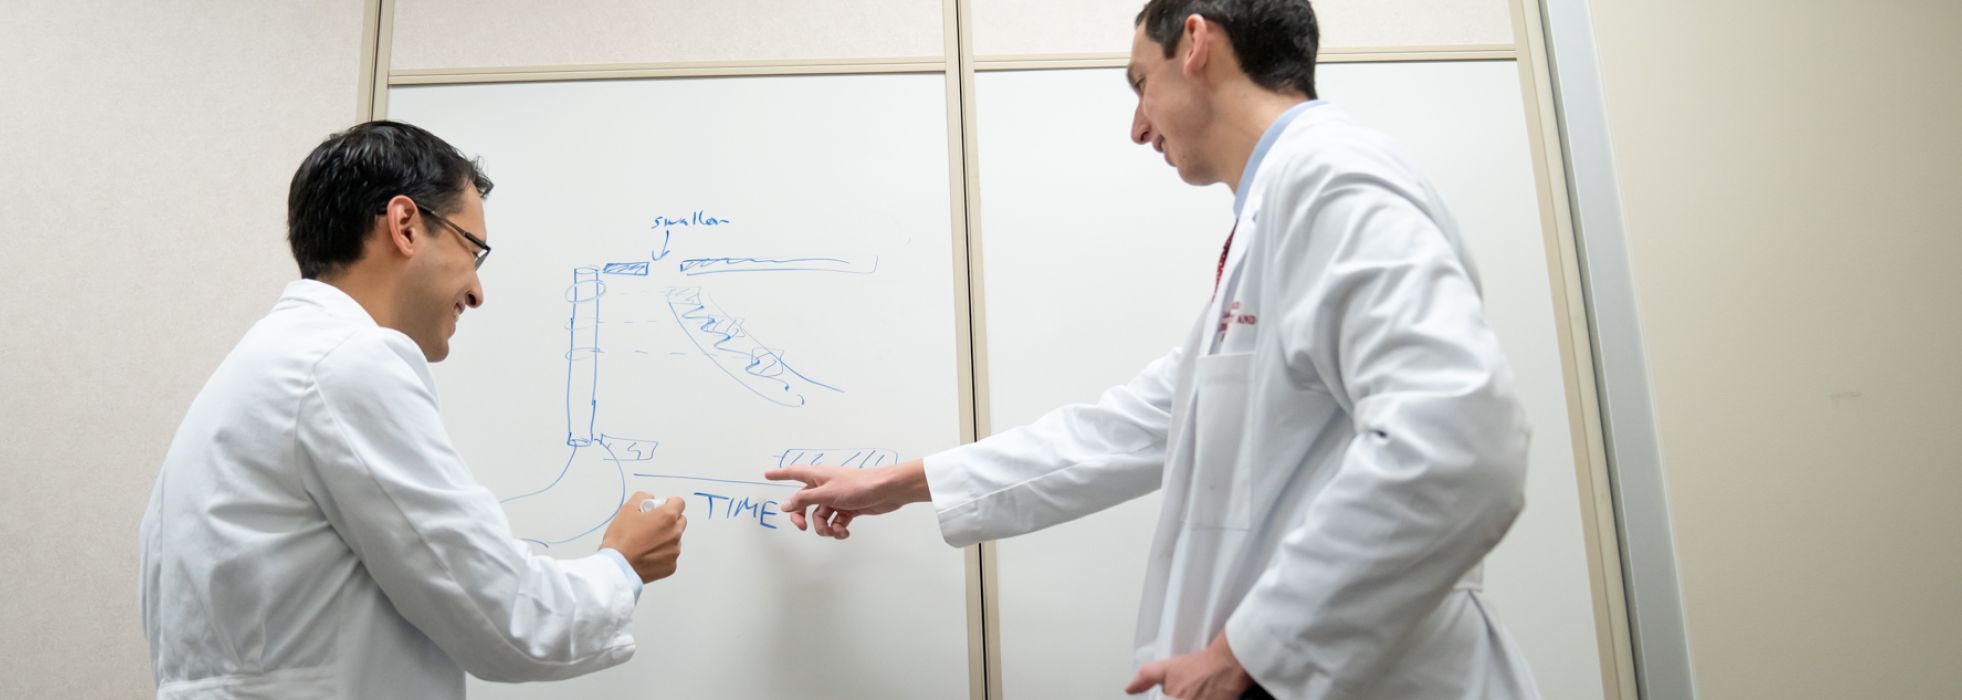 Photo of gastroenterology faculty member and learner working at white board